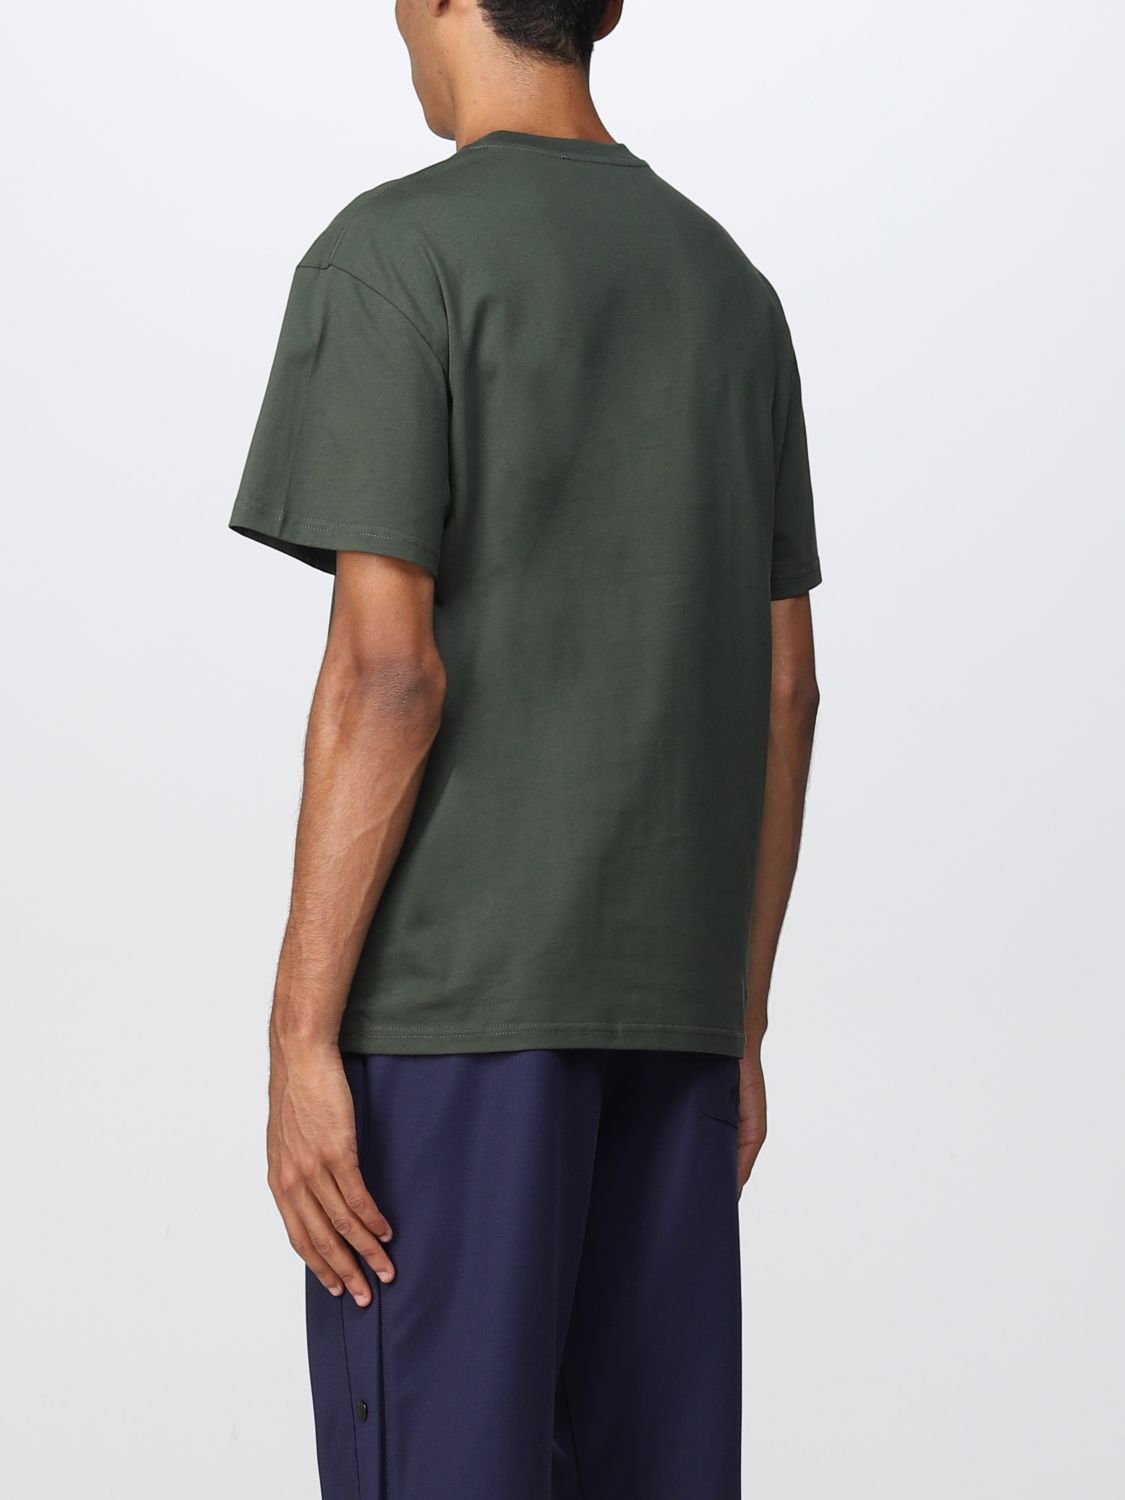 JW ANDERSON: t-shirt for man - Green | Jw Anderson t-shirt JT0061PG0772 ...